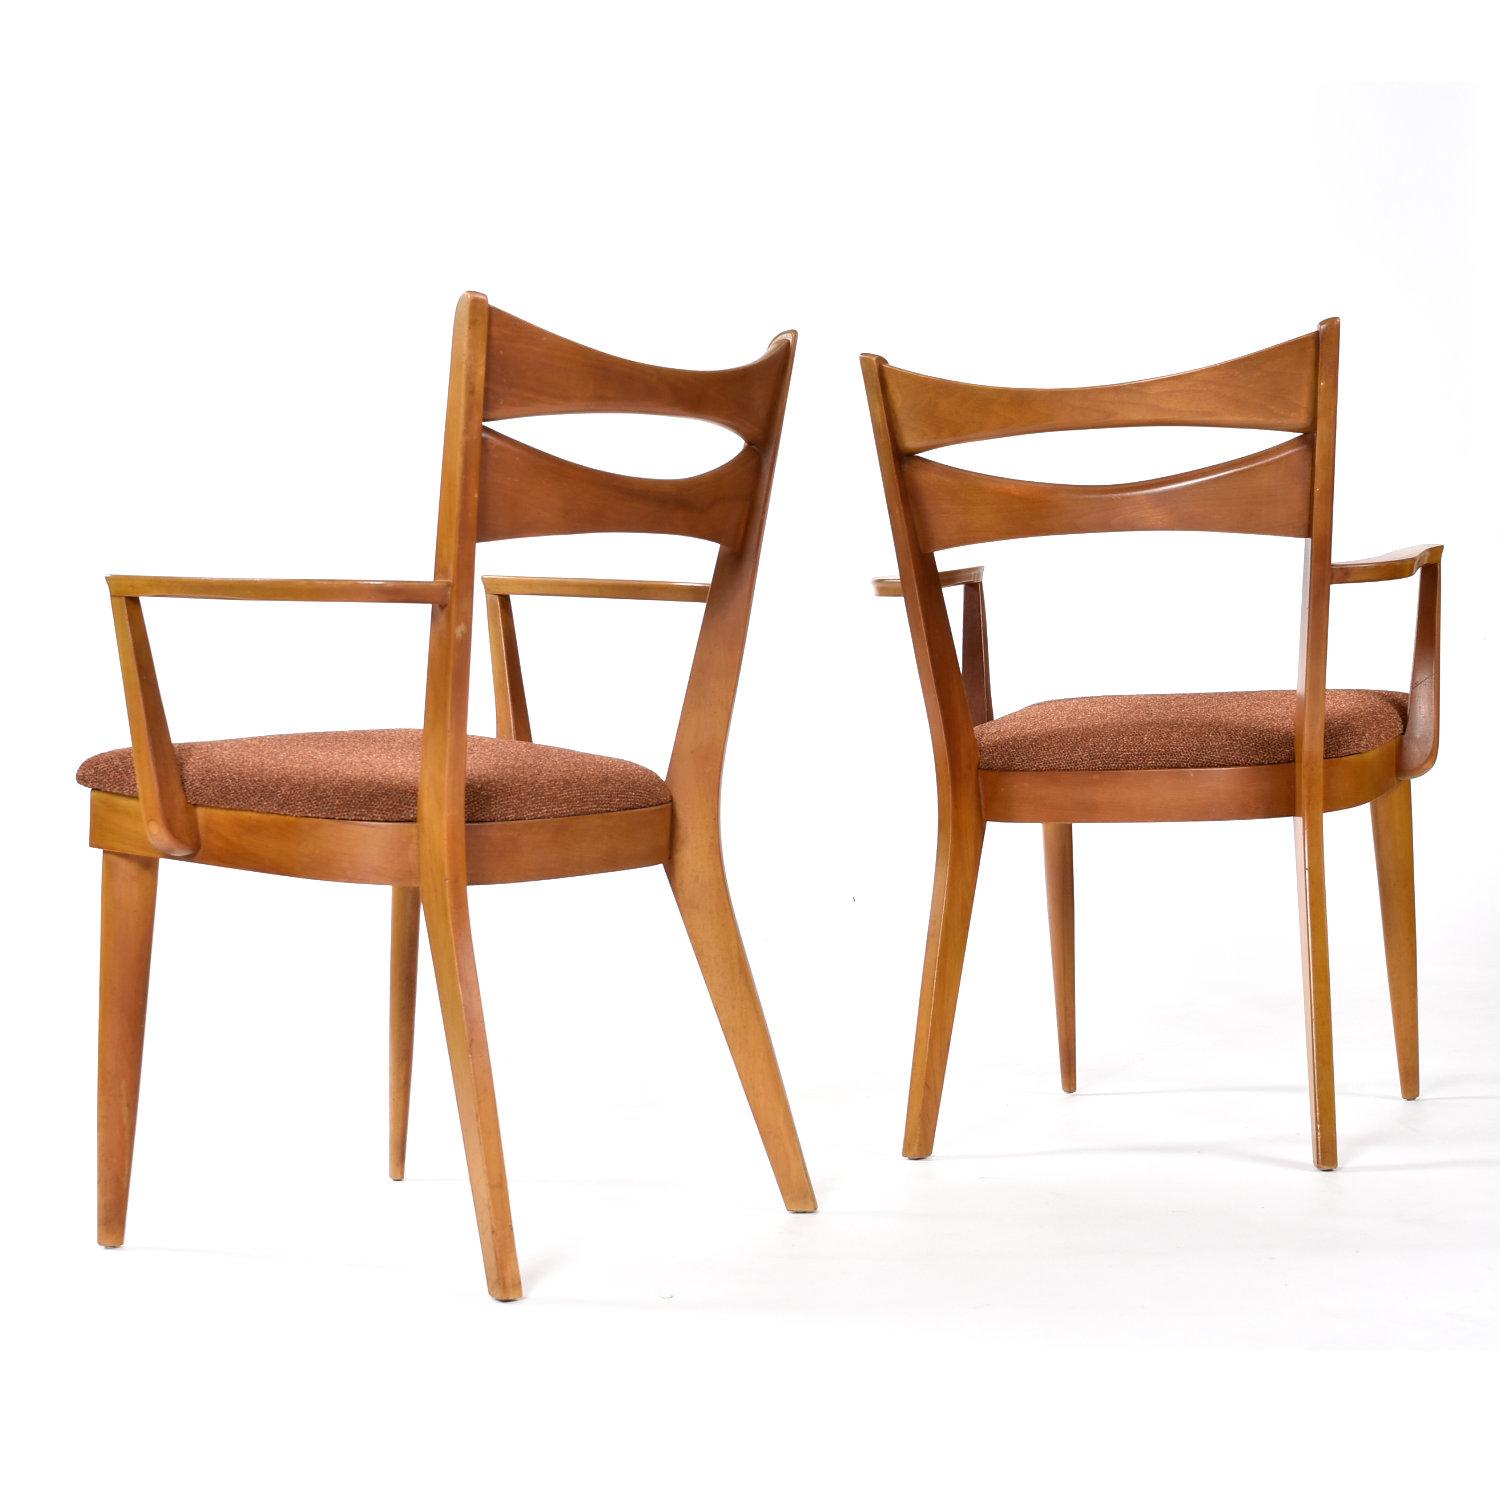 Mid-20th Century Set of Six Restored Heywood Wakefield M1553 a Cat’s Eye Dining Chairs For Sale